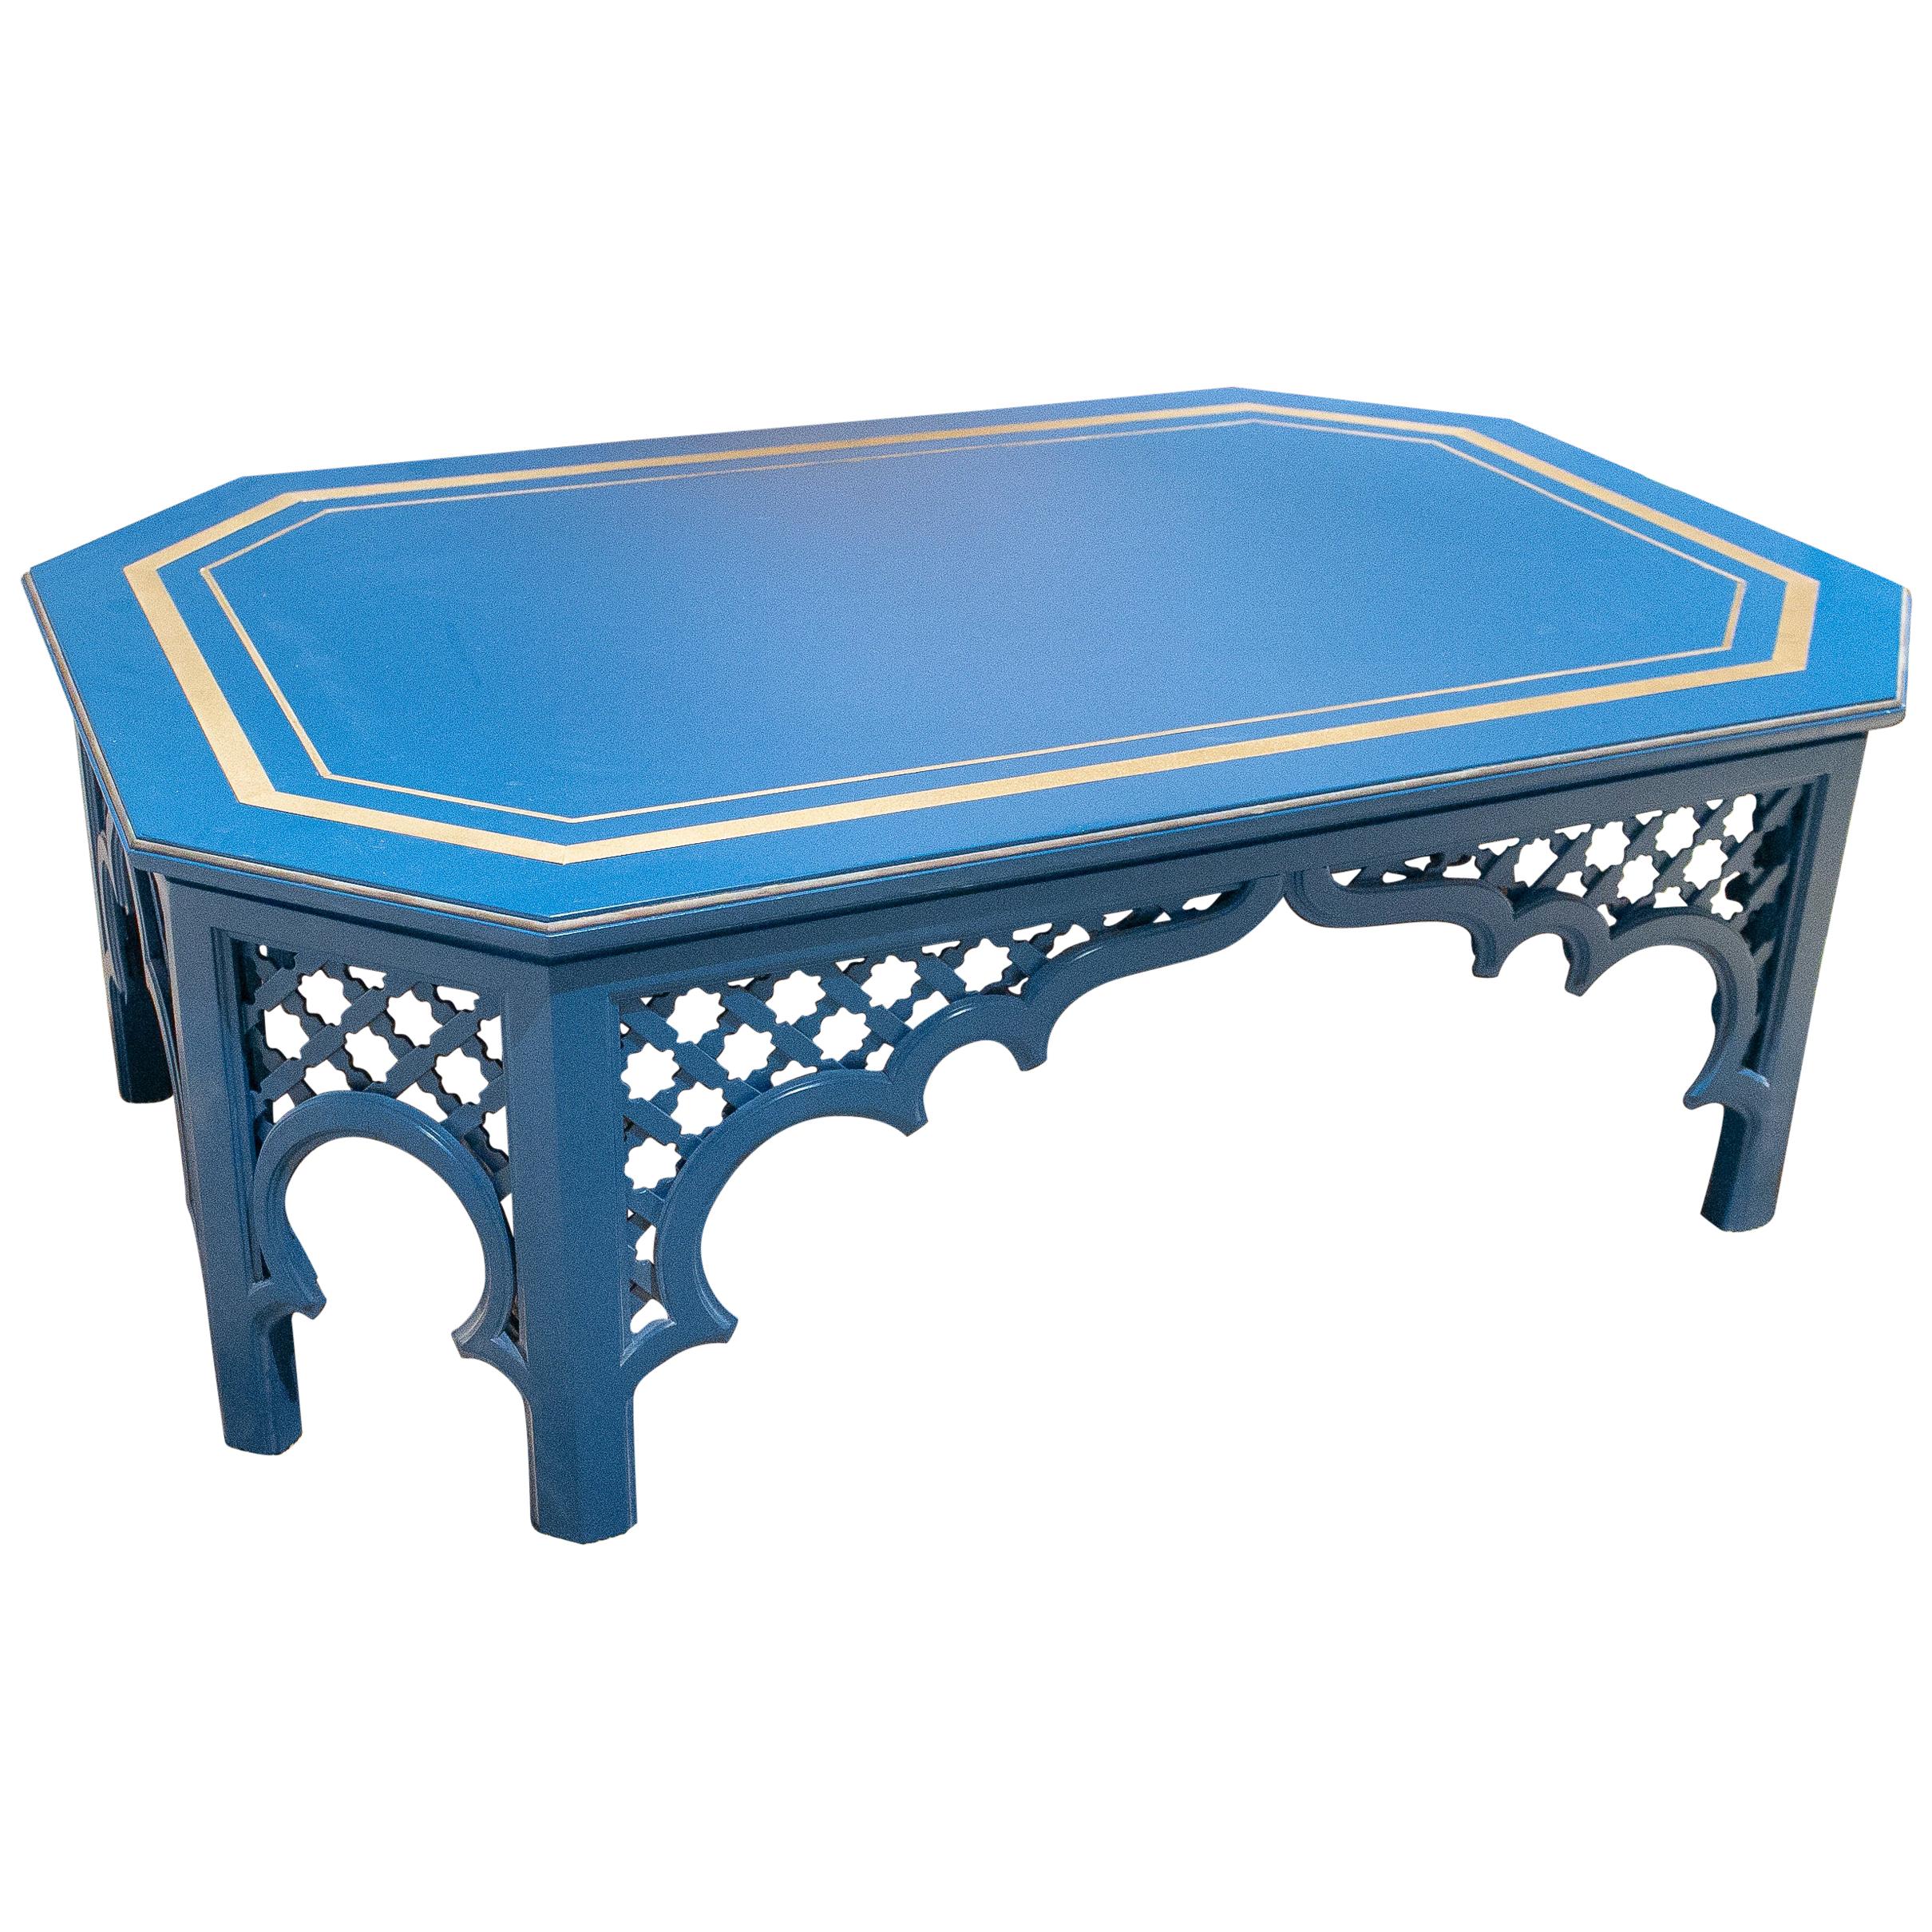 1970s Spanish Al-Andalus Inspired Wood and Brass Blue Coffee Table